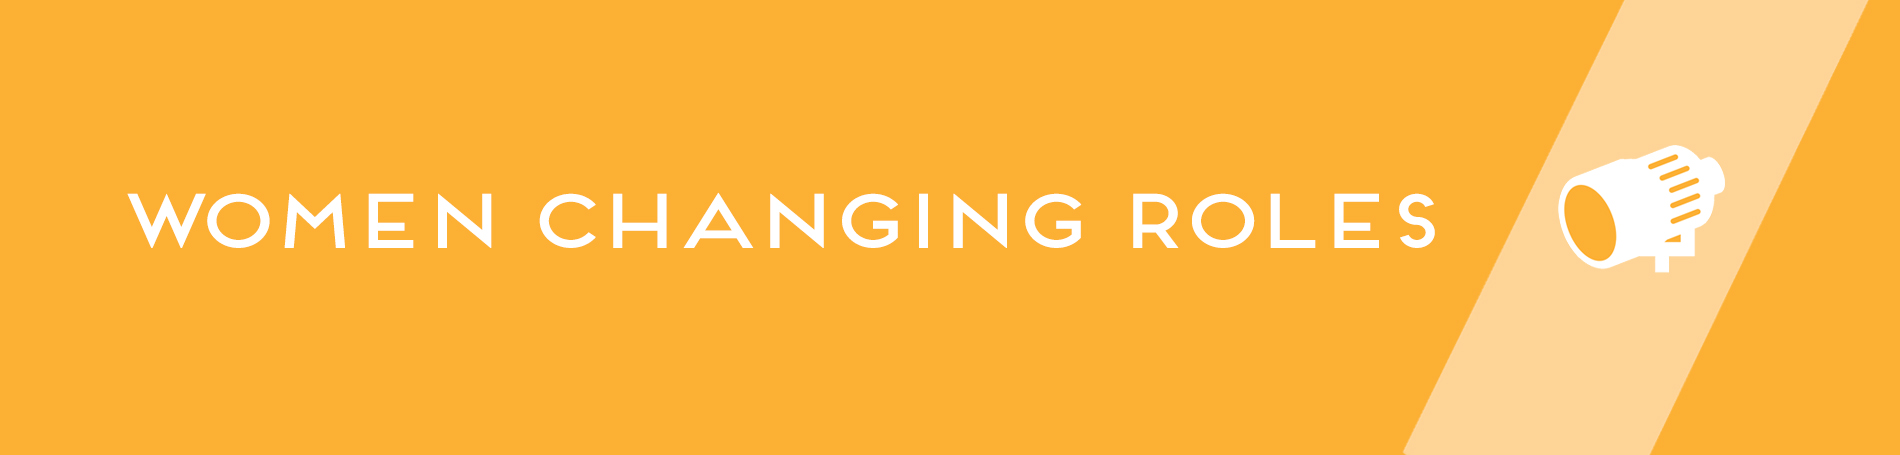 Orange banner with spotlight on the right and text on the left that reads "Women Changing Roles".